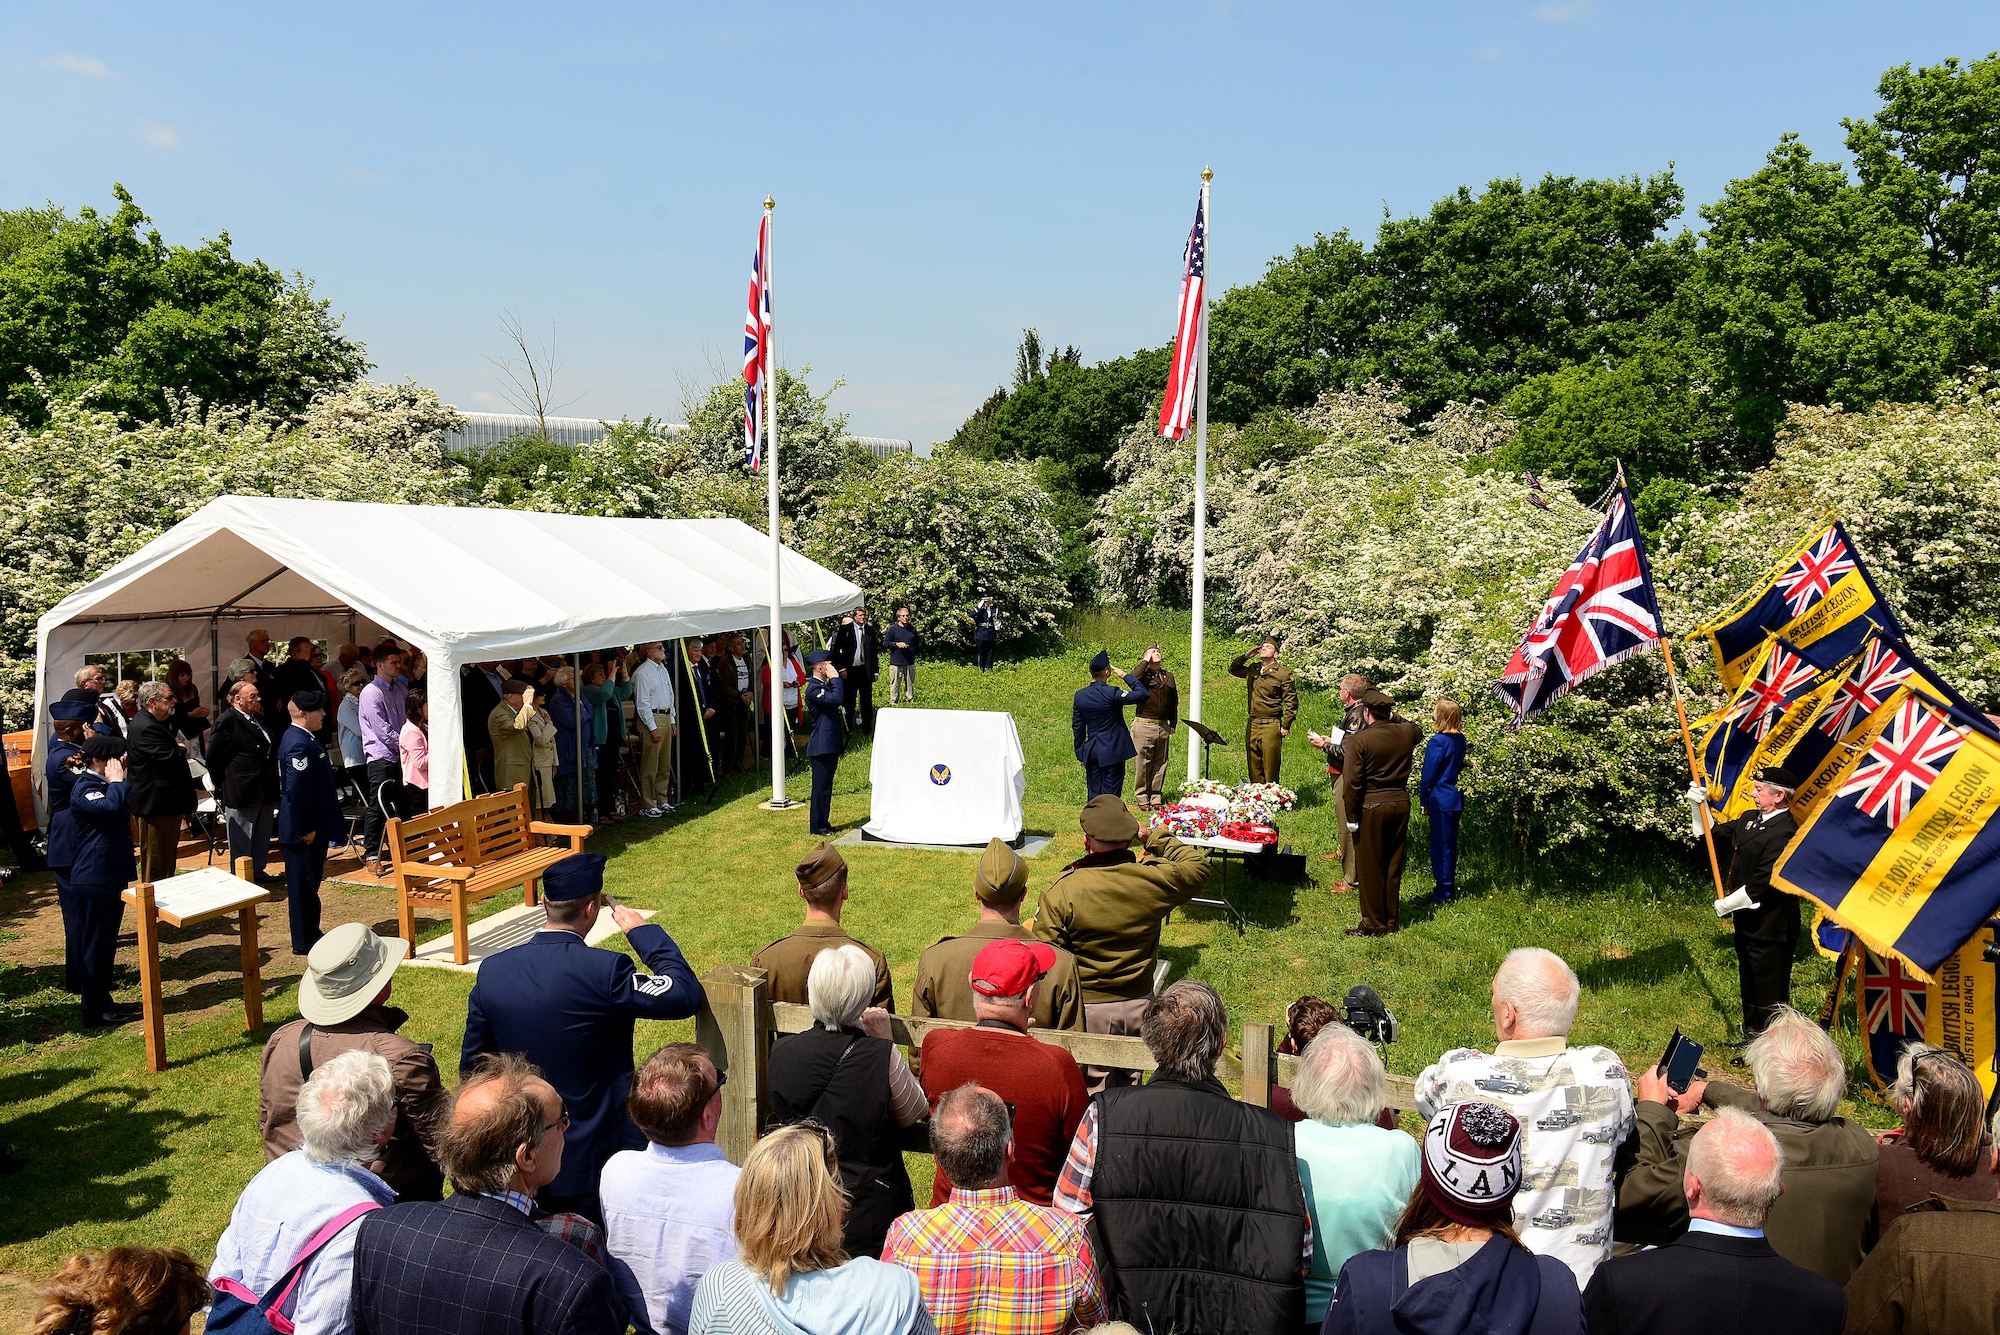 Over 100 attendees gathered to witness the unveiling of the 490th Bombardment Group Memorial, May 29, in the village of Brome, England. The ceremony was the culmination of a two-year effort by a small group of UK citizens from the Eye area of Suffolk to create a permanent monument dedicated to the men of the 490th for their contributions during World War II. (U.S. Air Force photo/ Tech Sgt. Matthew Plew)